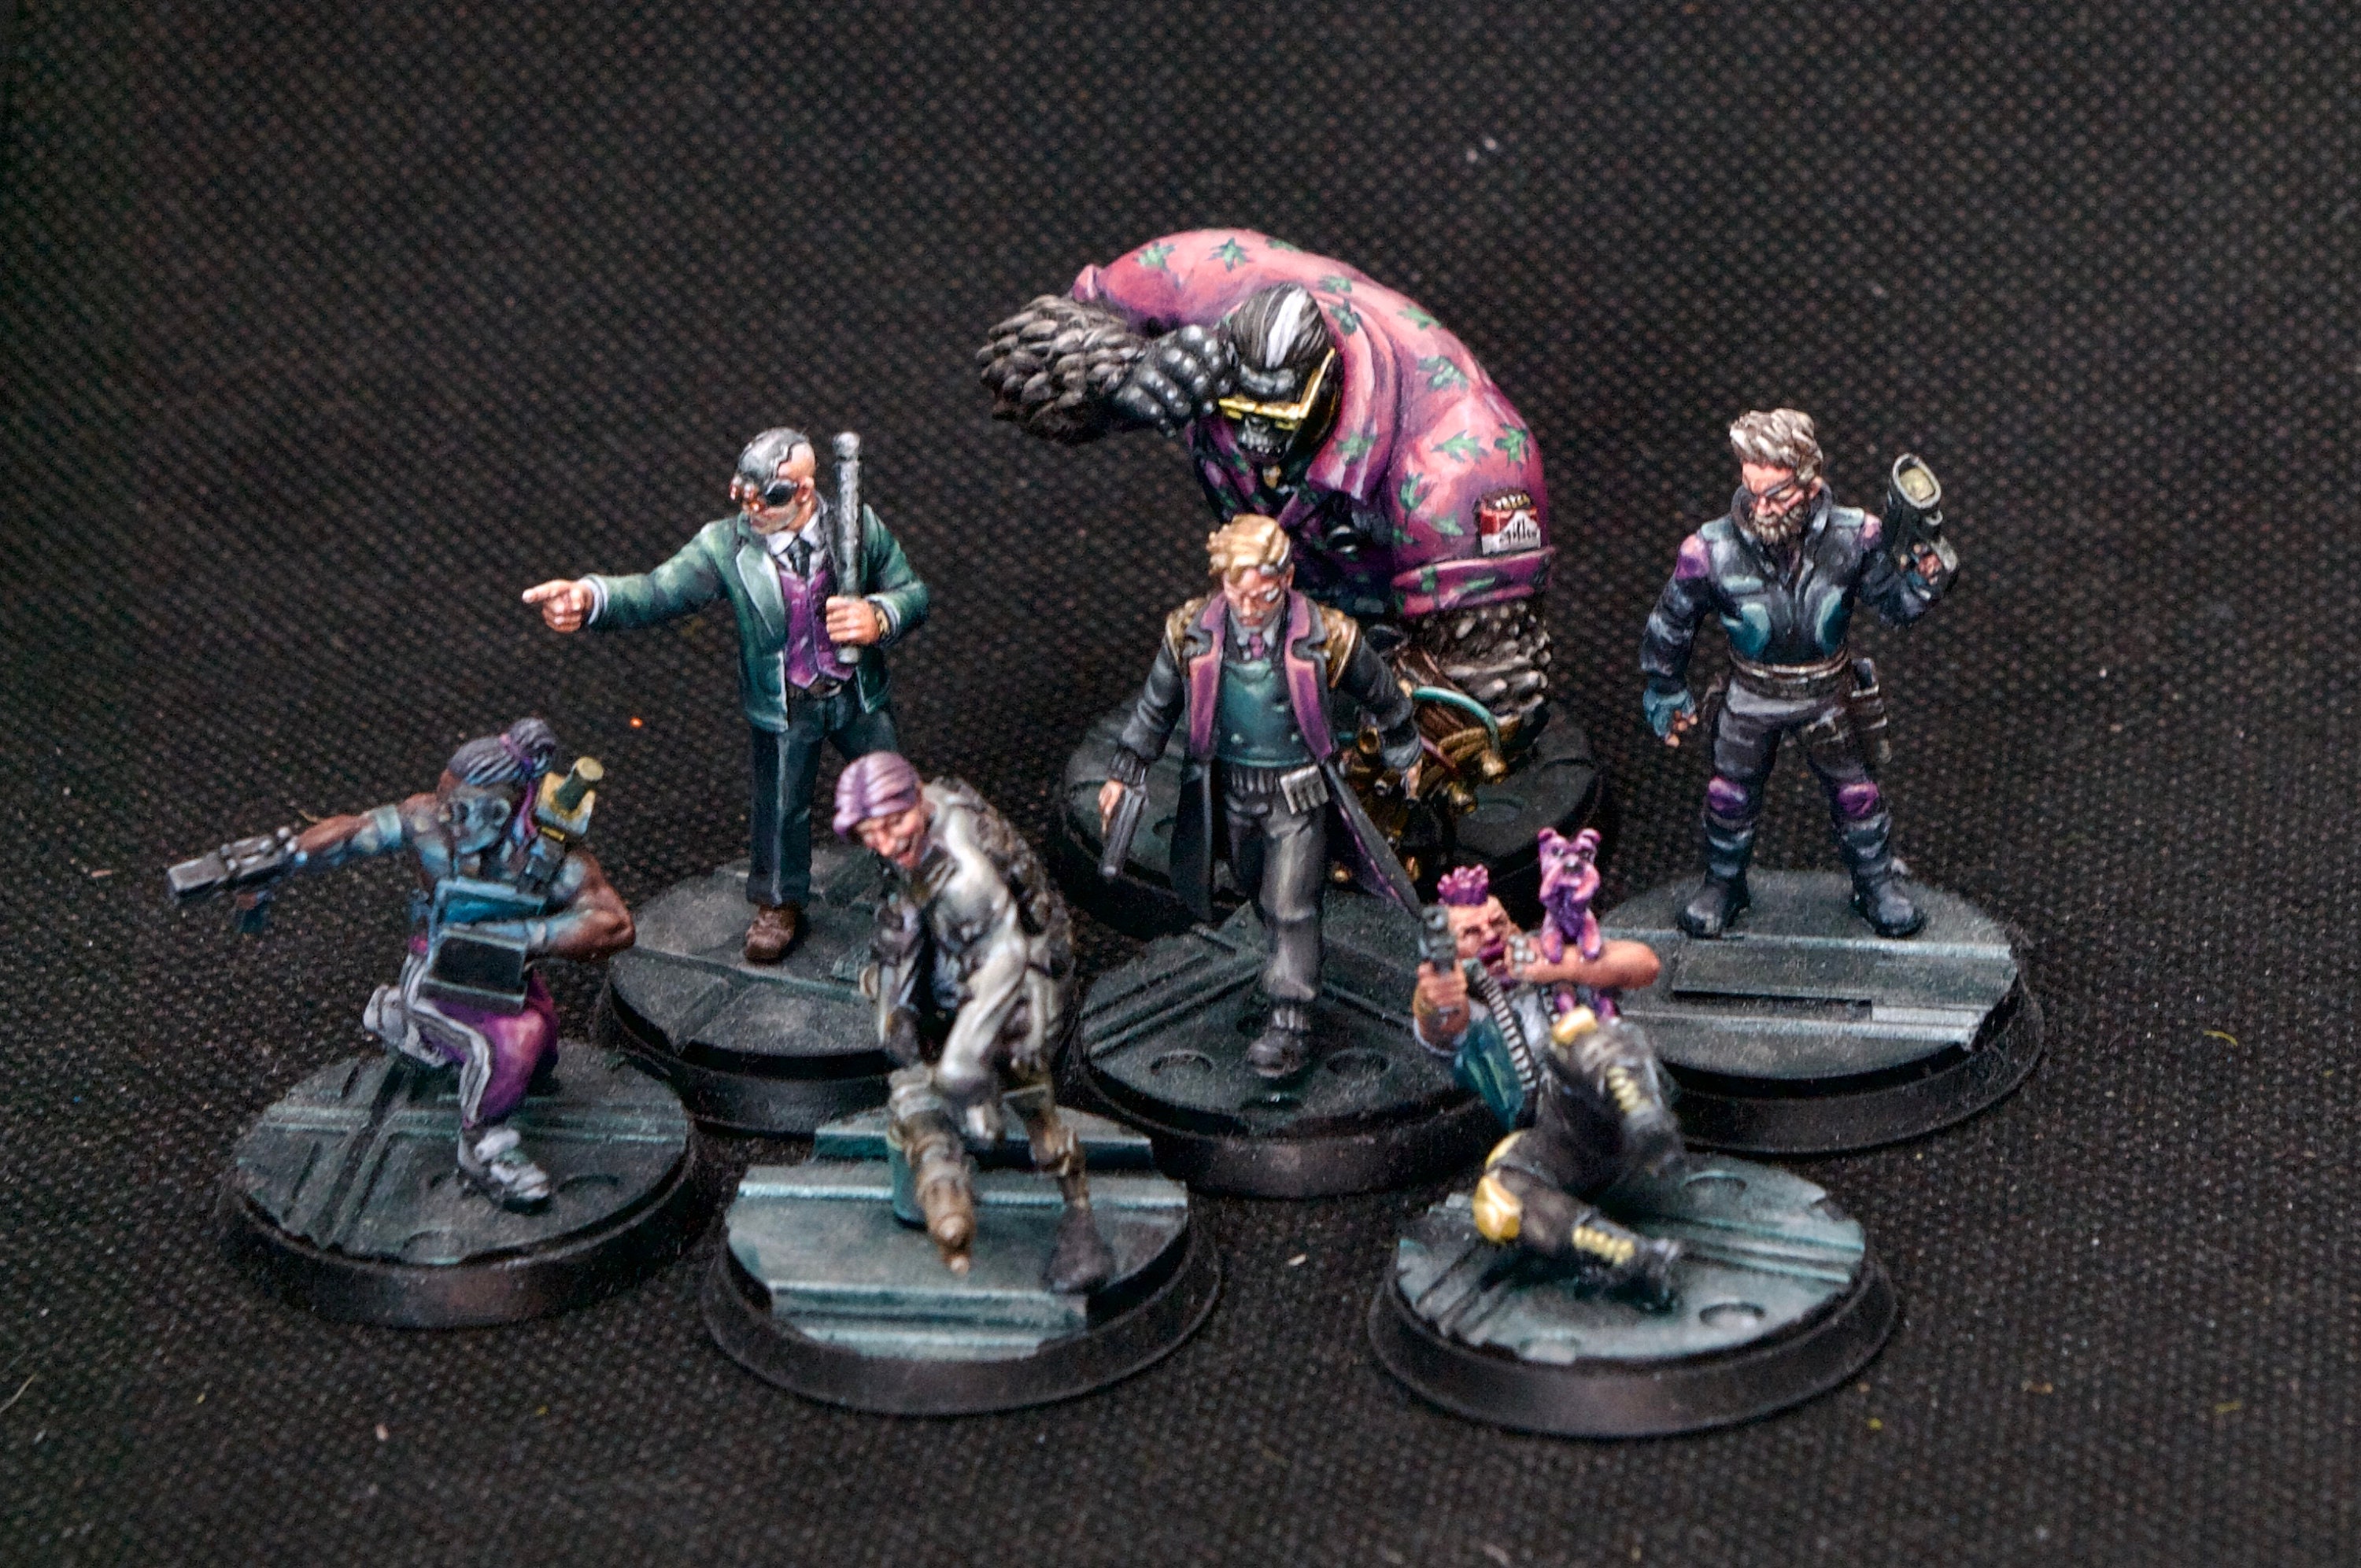 Get started painting miniatures with 's Cyber Monday deals - Polygon